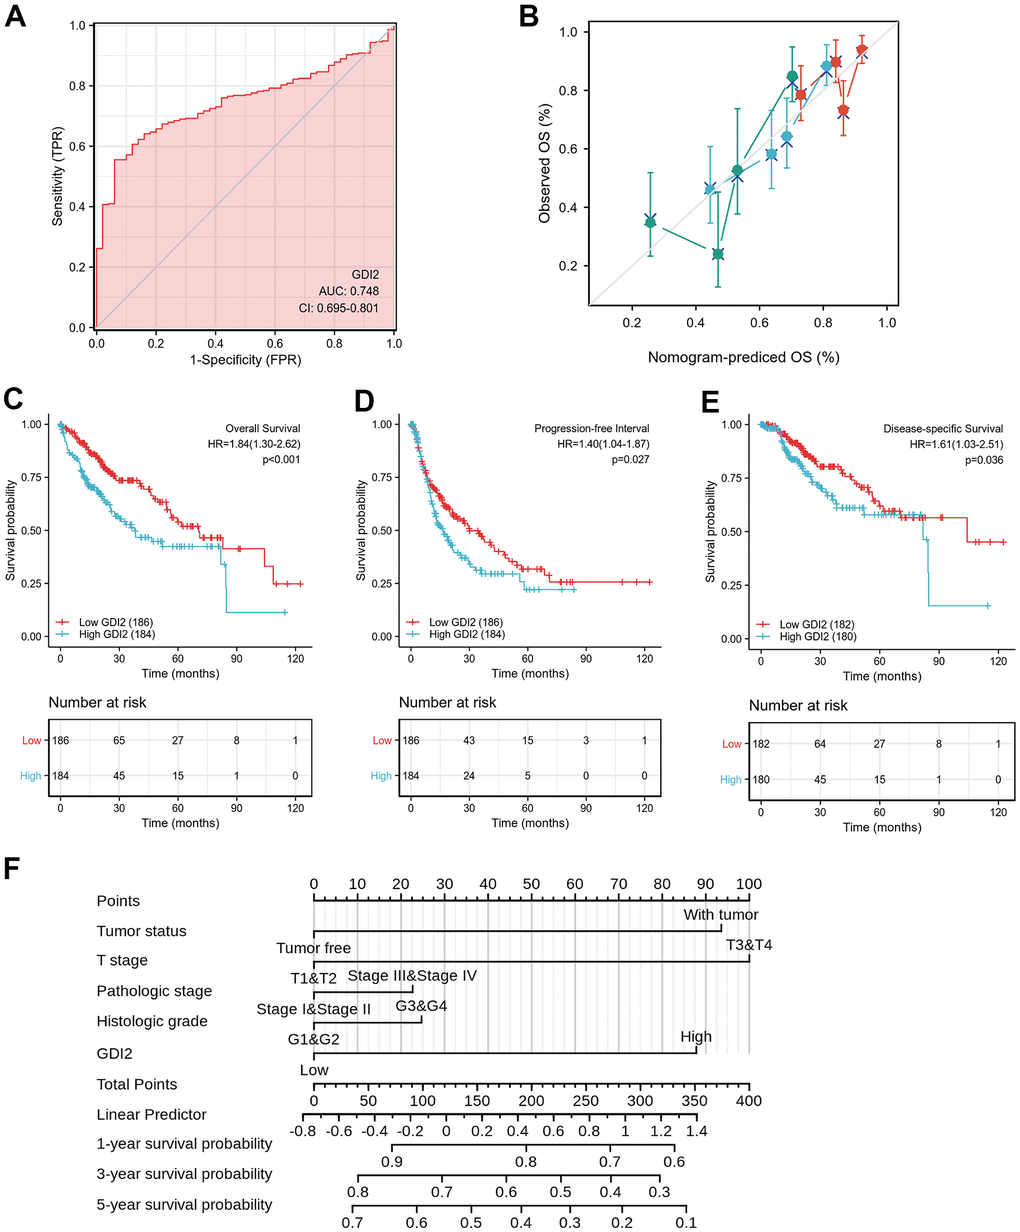 Effective nomogram model for prognostic evaluation of GDI2. (A) ROC analysis of GDI2 showing a high ability to discriminate controls from liver samples validated in TCGA. The X-axis represents False Positive Rate (FPR), while the Y-axis denotes True Positive Rate (TPR). AUC is plotted as sensitivity% vs 100-specifificity%. (B) Nomogram to predict survival probability at 1, 2, and 3 years of OS for HCC patients. (C–E) High GDI2 expression was associated with poor outcomes on (C) overall survival (OS), (D) progression-free interval (PFI), and (E) disease-specific survival (DSS) in HCC patients of a TCGA cohort. Blue: high GDI2 (n=184); Red: low GDI2 (n=186). *P **P F) Calibration curve with Hosmer-Lemeshow test of the nomogram-predicted OS (%) in the TCGA-LIHC cohort relating to GDI2 expression and tumor status, as well as T Stage, Pathologic Stage and Histologic Grade. The X-axis represents Prognostic Probability (0-100%), while the Y-axis denotes Observed OS (0-100%). Gray line: ideal line.